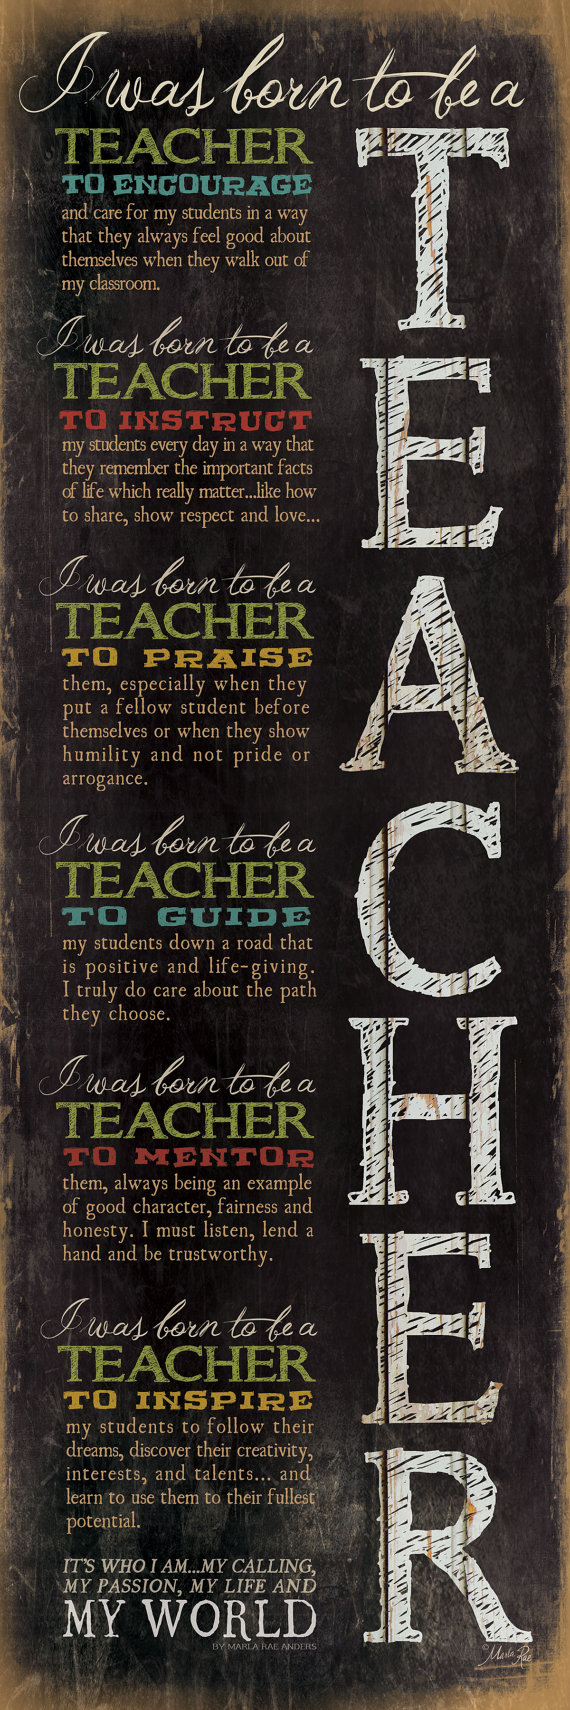 i was born to be a teacher poster